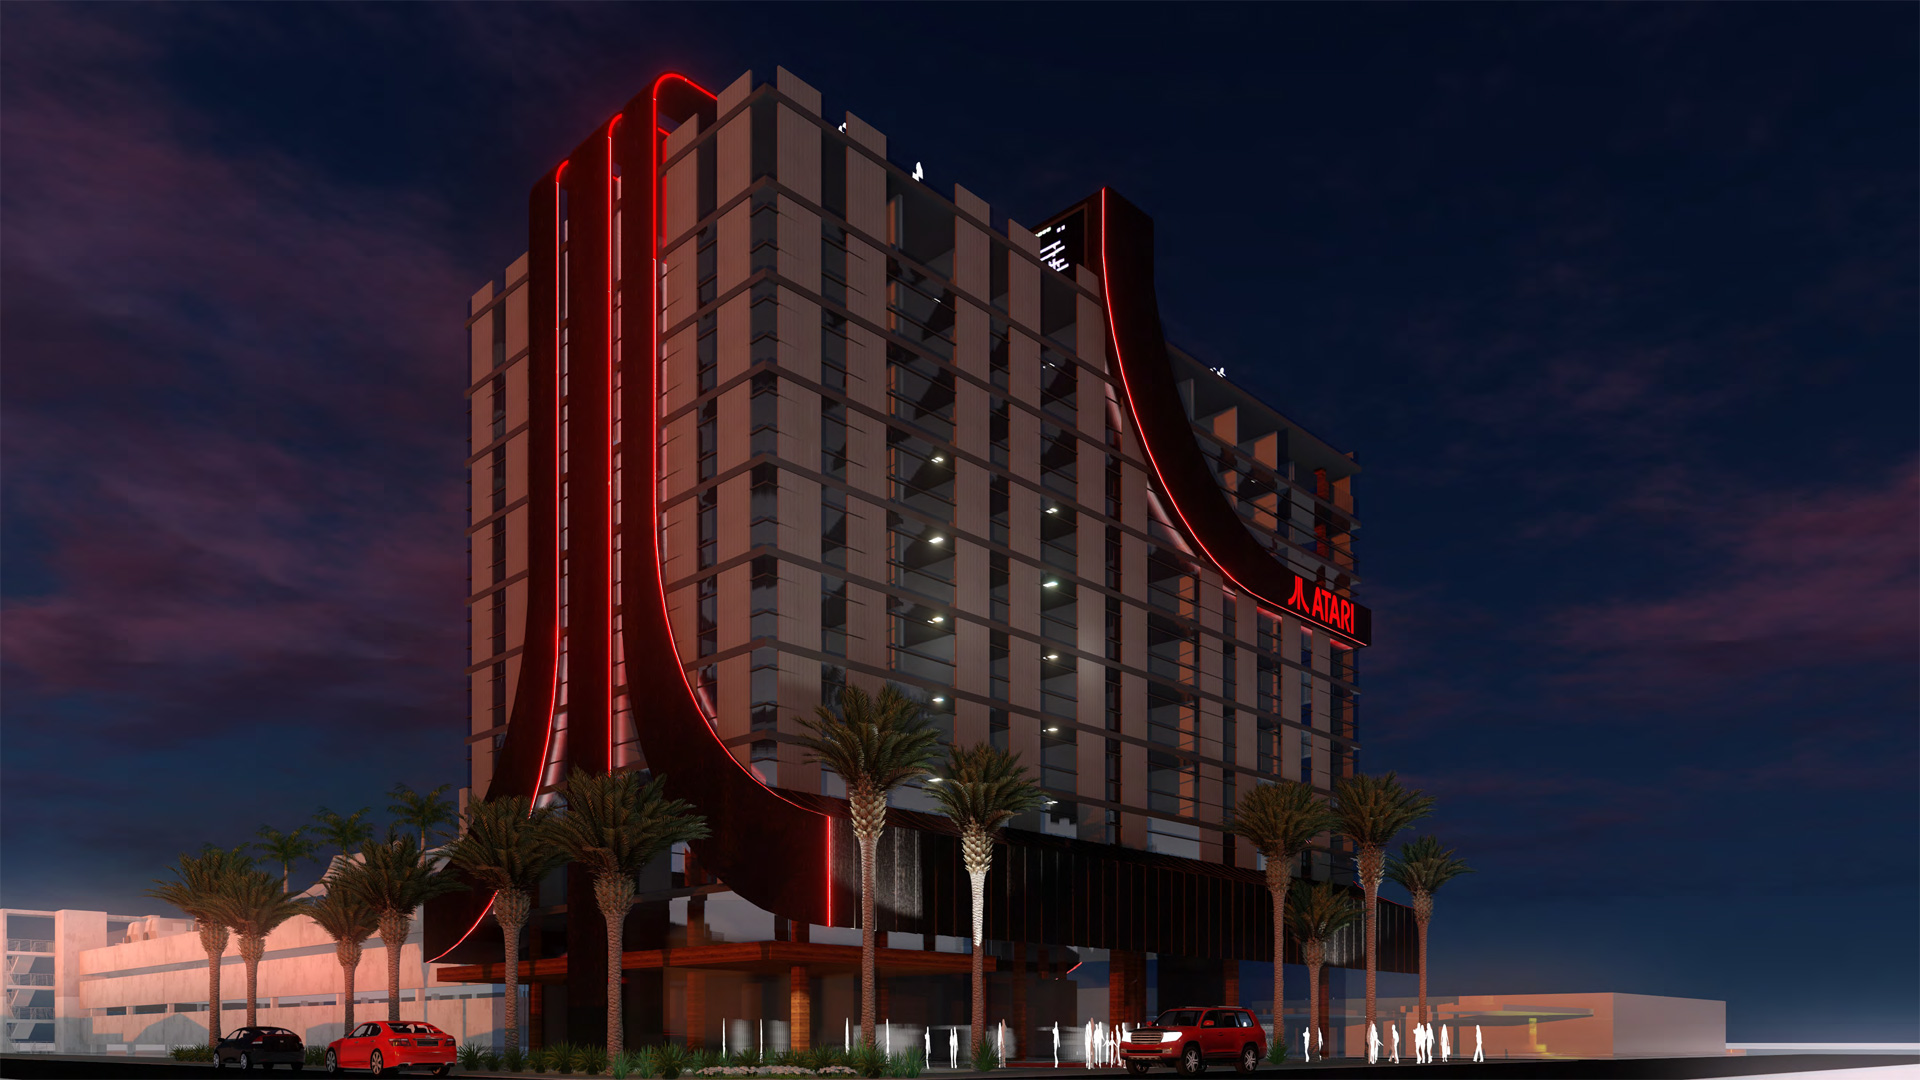 And finally... Atari signs deal to build video game-themed hotels